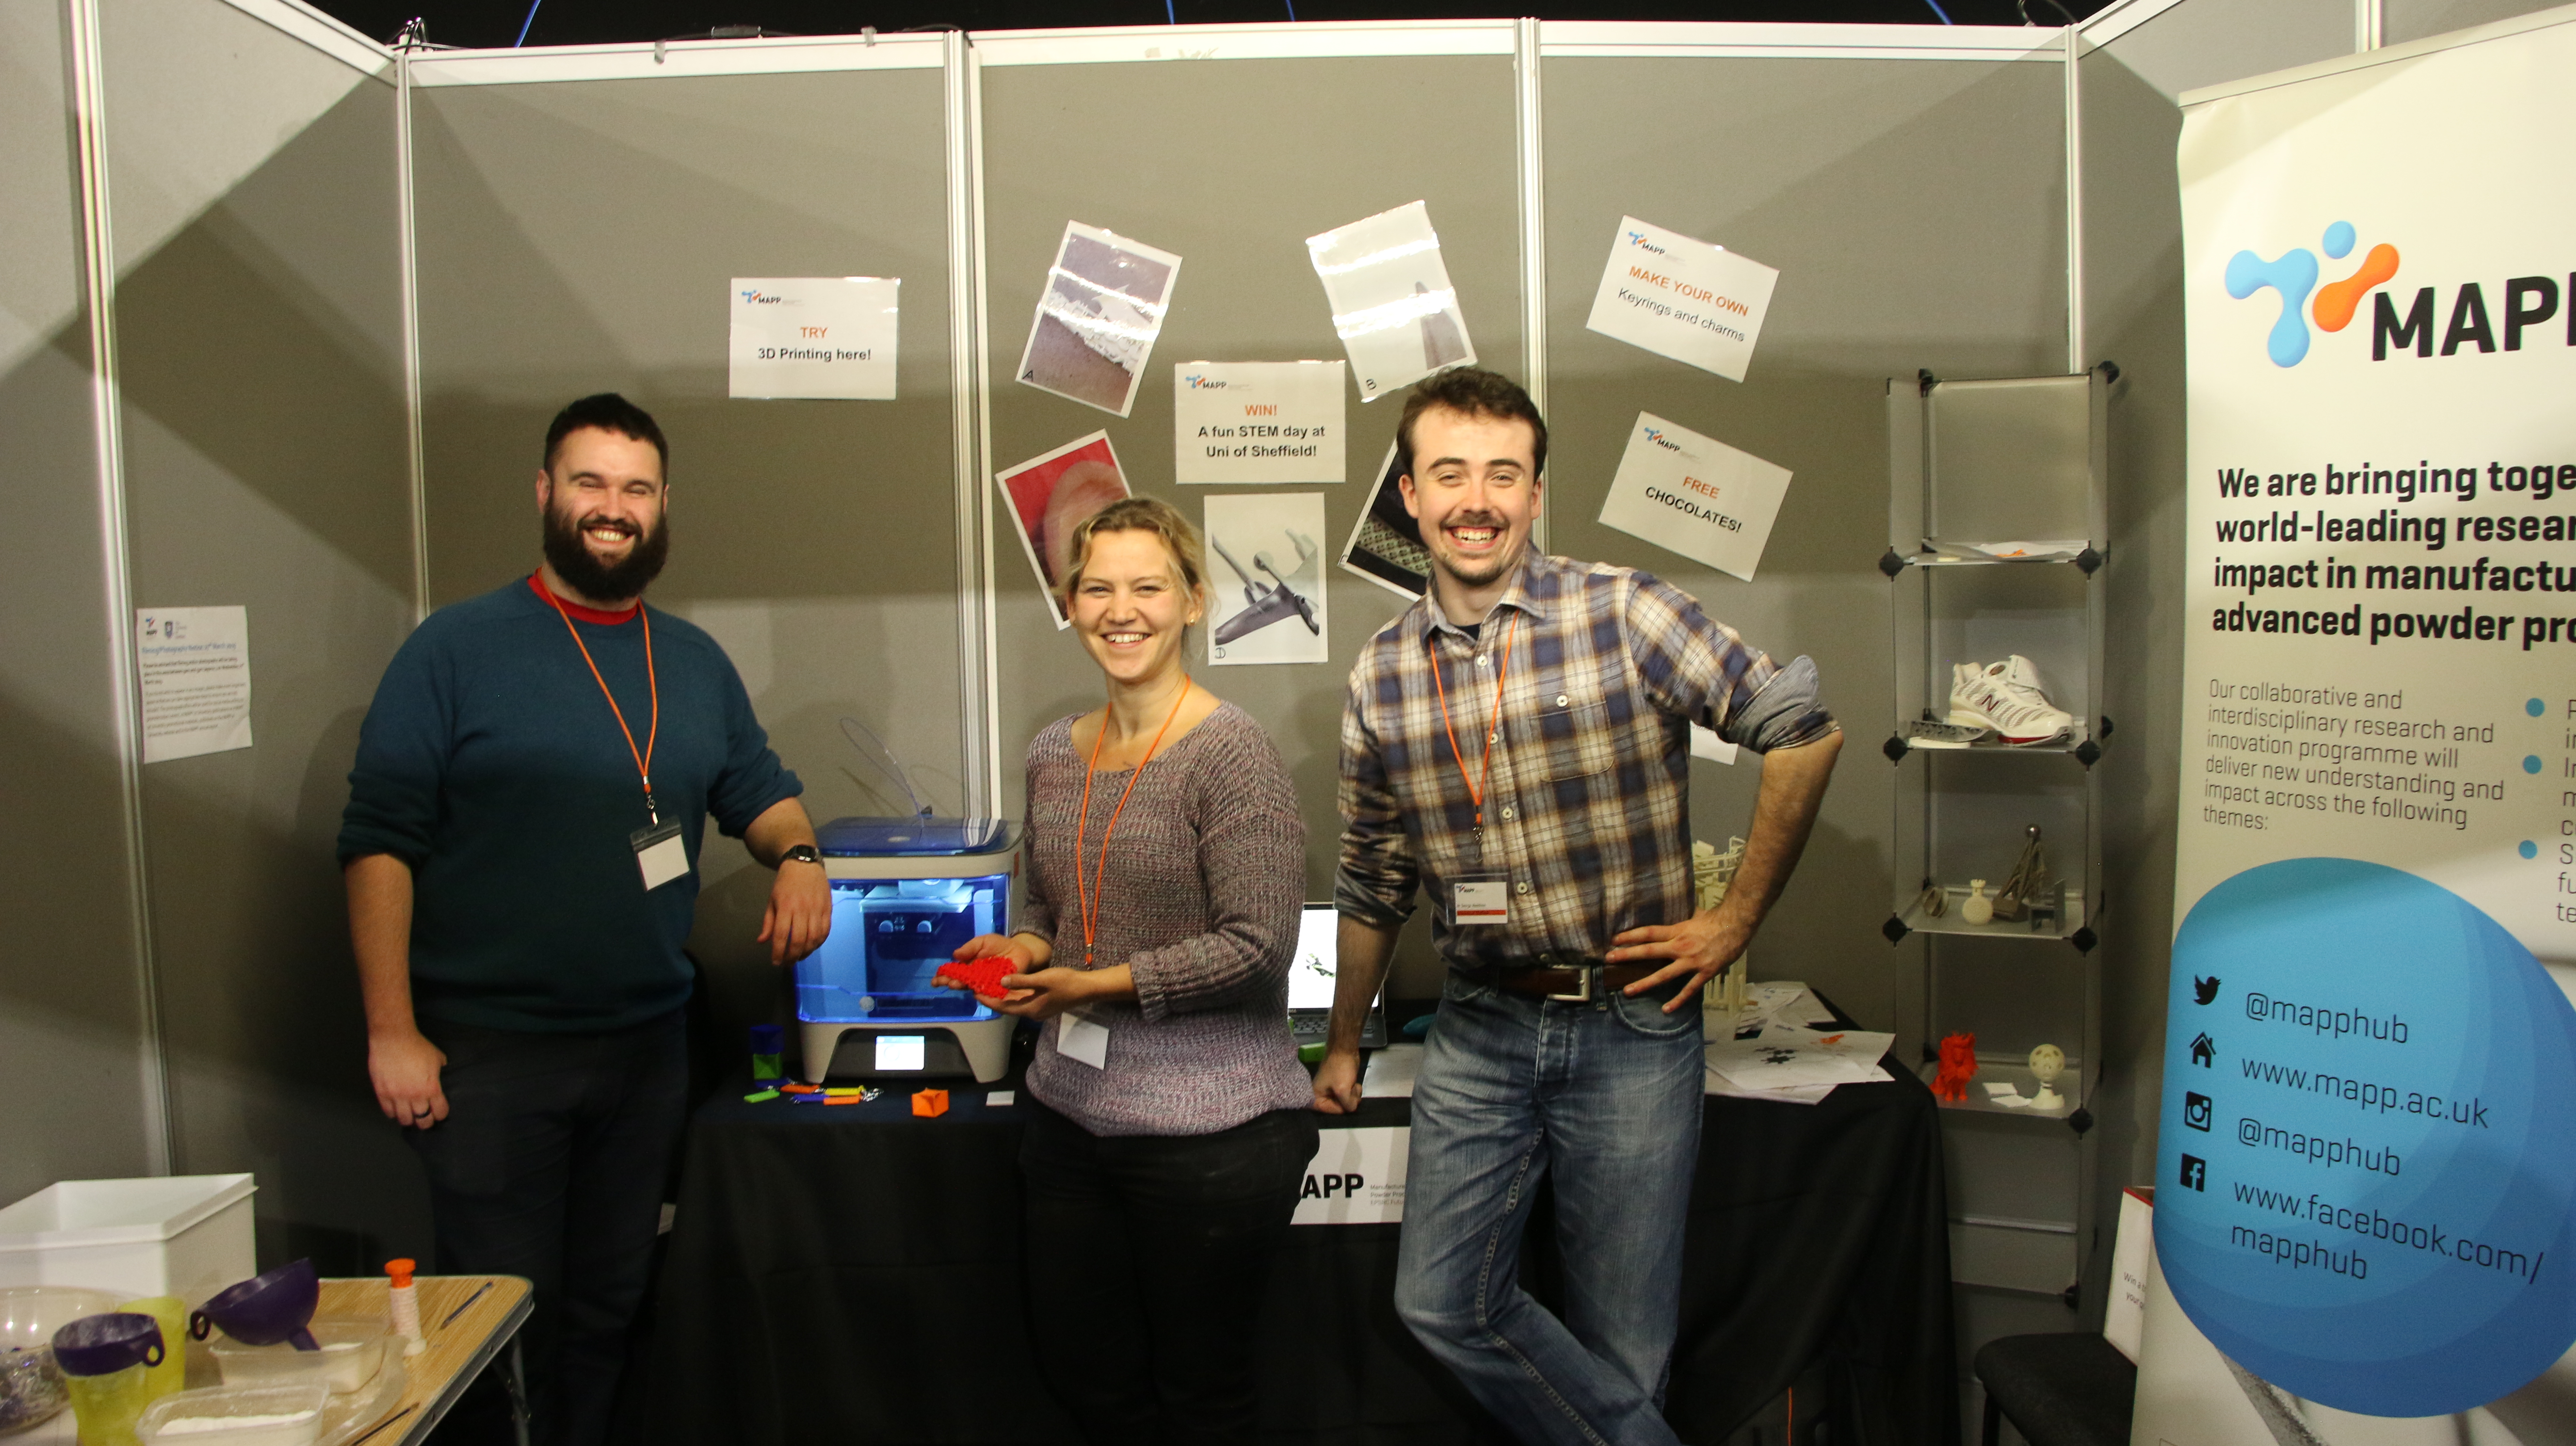 People running the MAPP Get Up To Speed with STEM stand ready to welcome visitors - L to R Thomas Robb, MAPP aligned PhD student, Dr Felicity Freeman, MAPP aligned research associate, George Maddison, MAPP aligned PhD student.